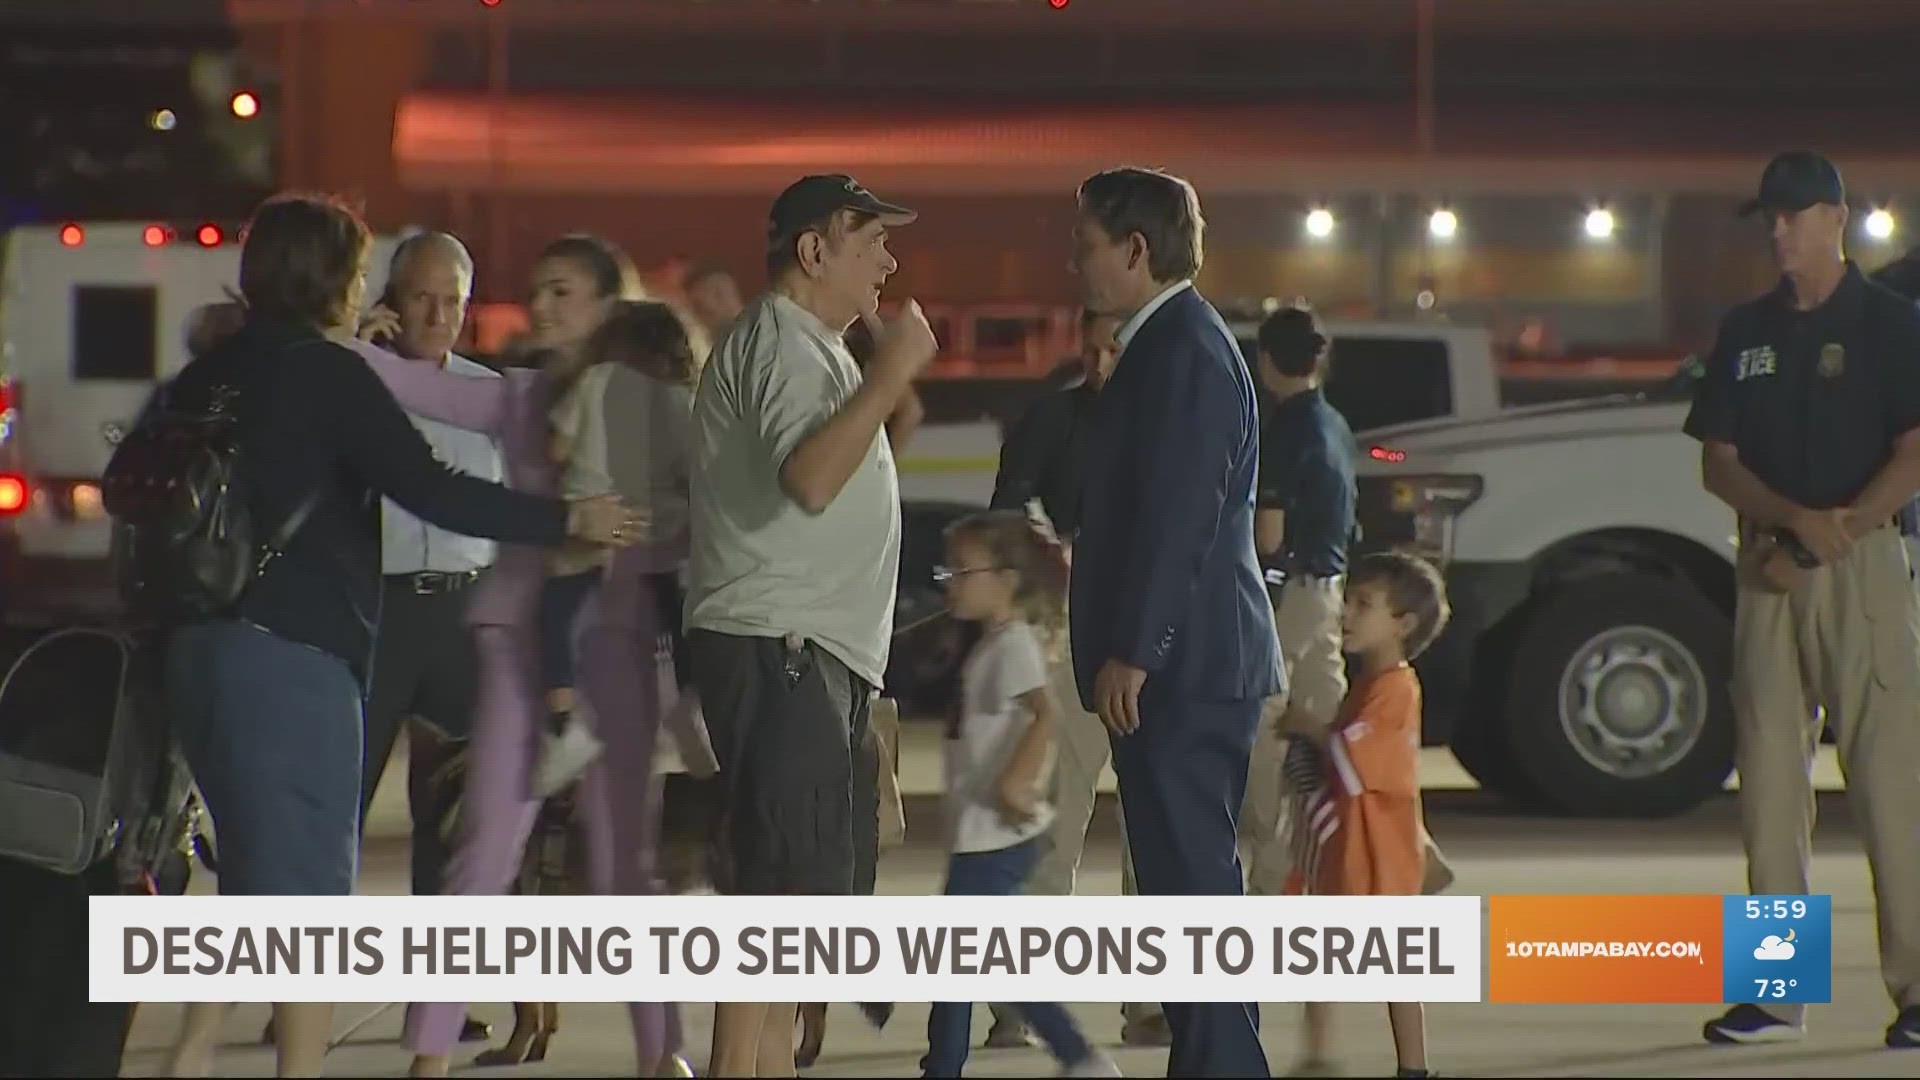 Governor DeSantis said he's getting drones, weapons, and ammo through private groups at the request of the Israeli consulate general.